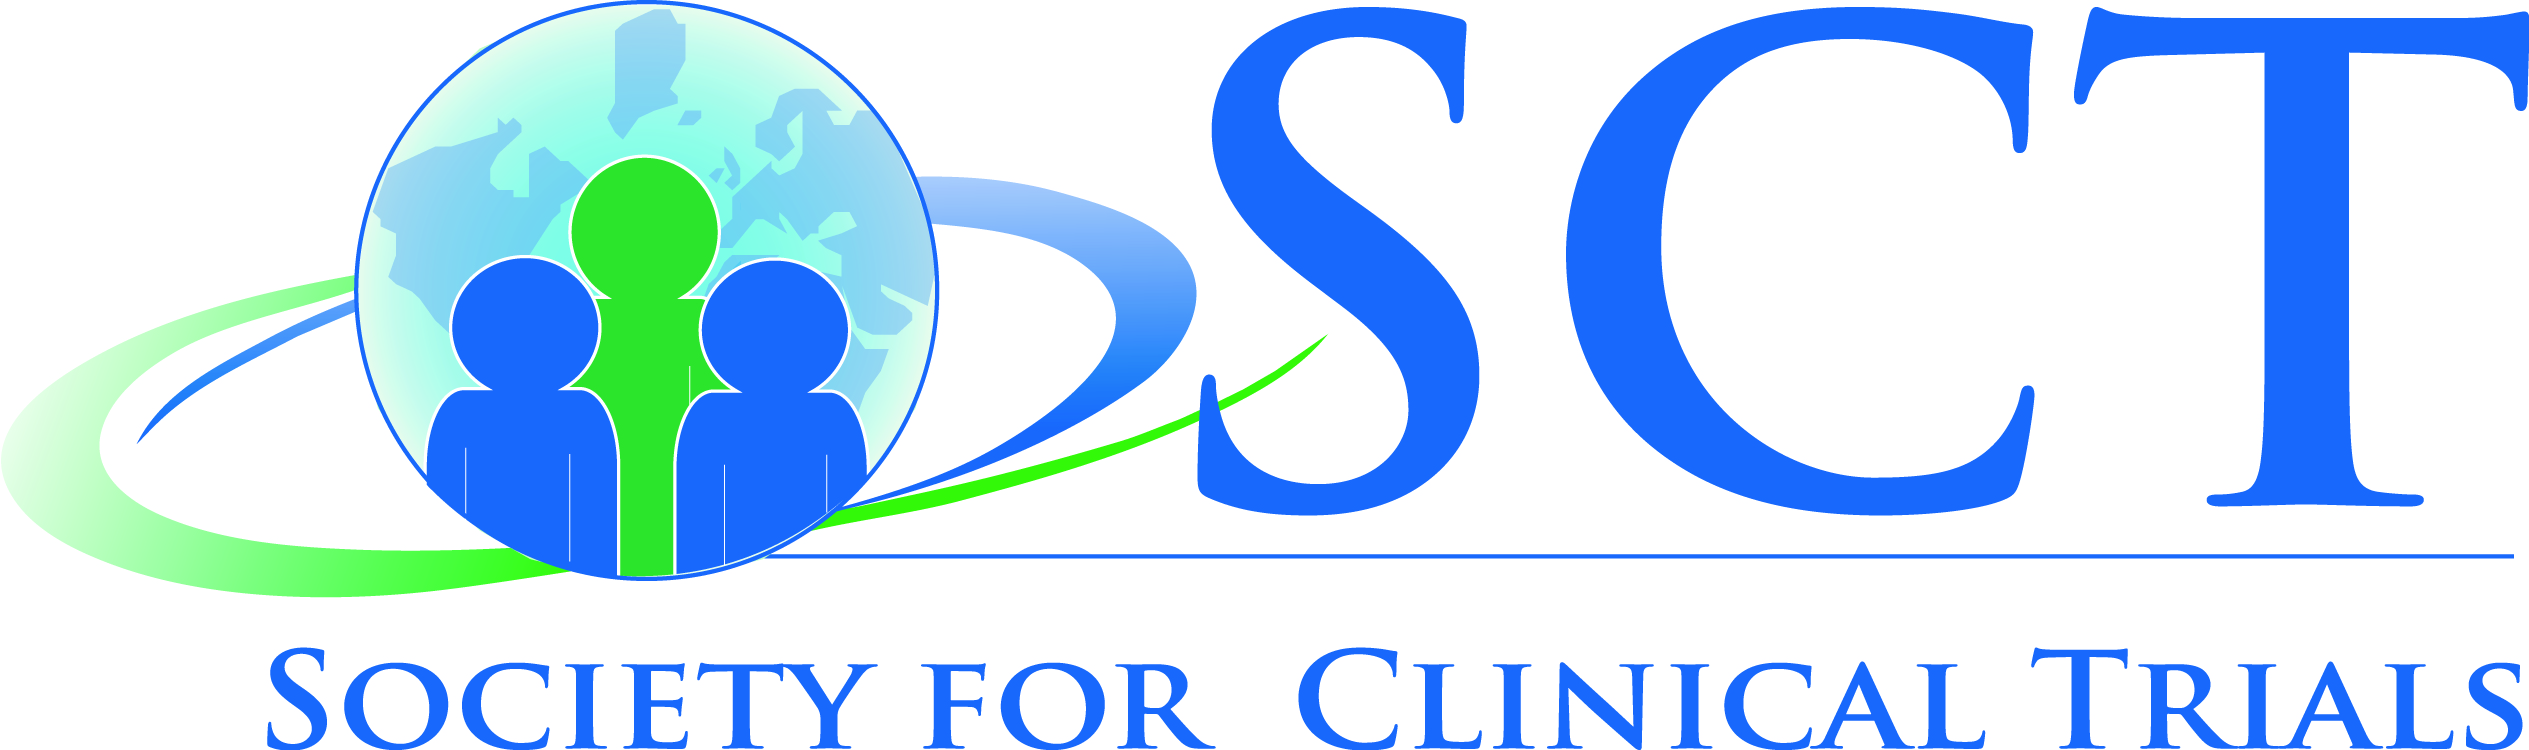 Society for Clinical Trials